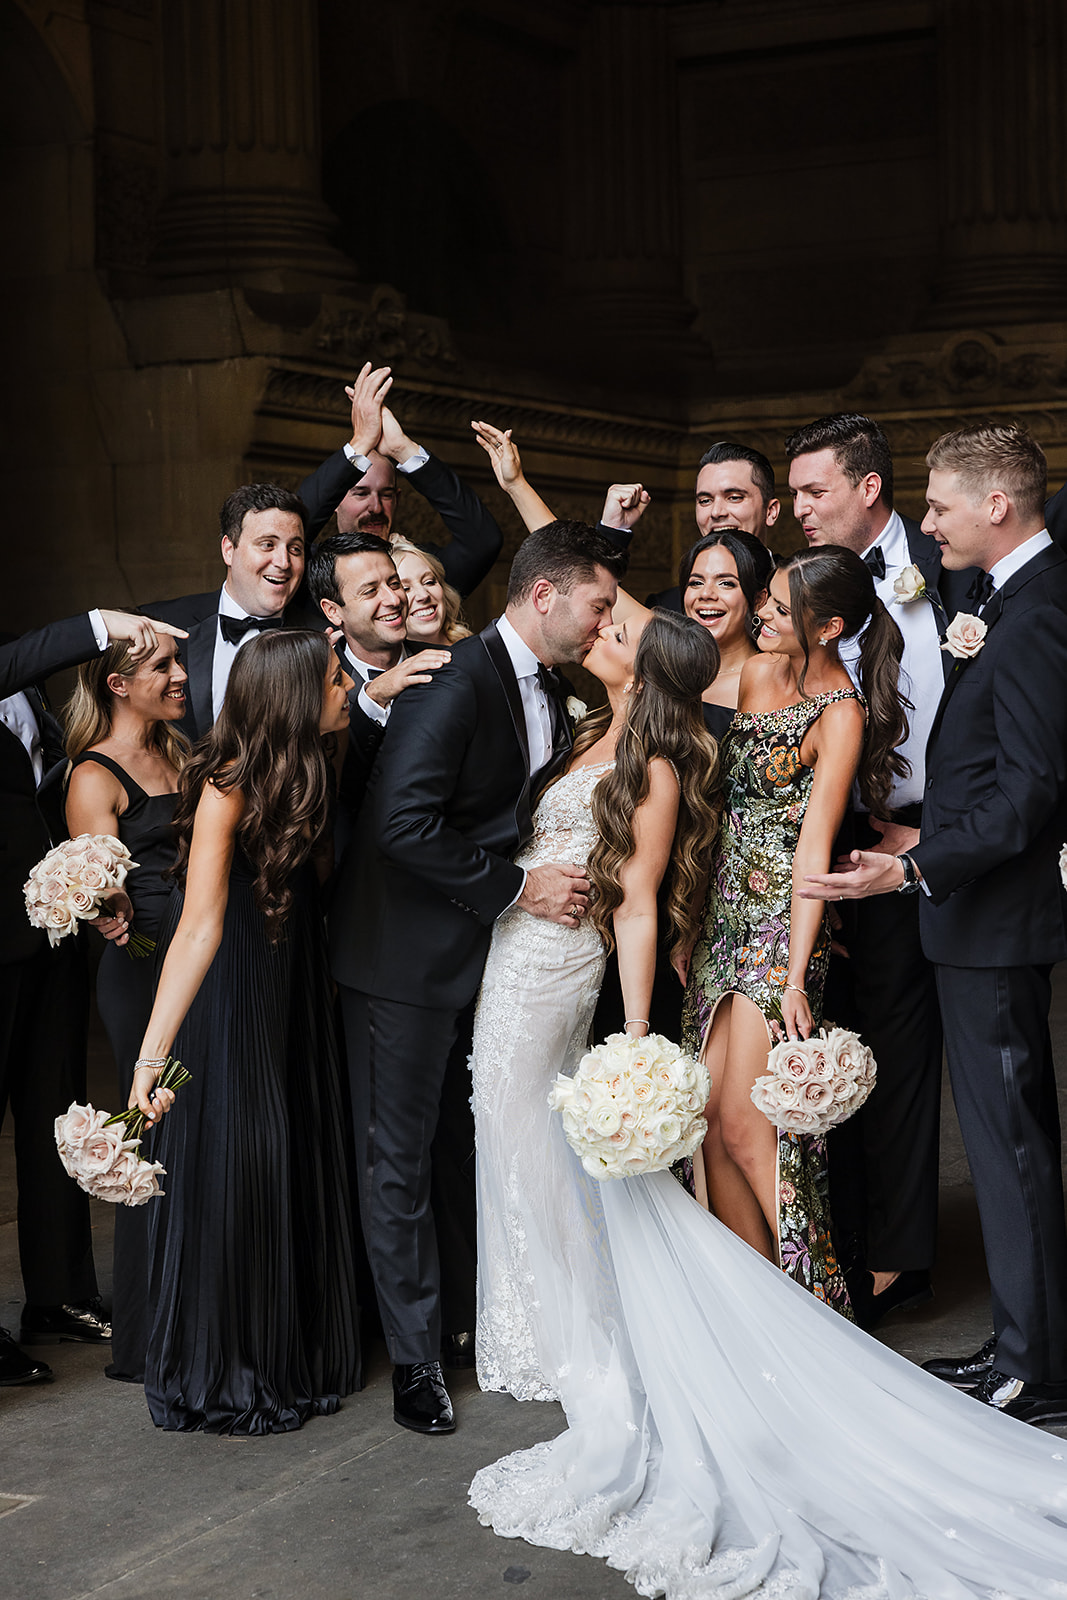 Chic and elegant Bridal party with black maxi dresses and timeless ivory rose bouquets at The Crystal tea Room wedding 